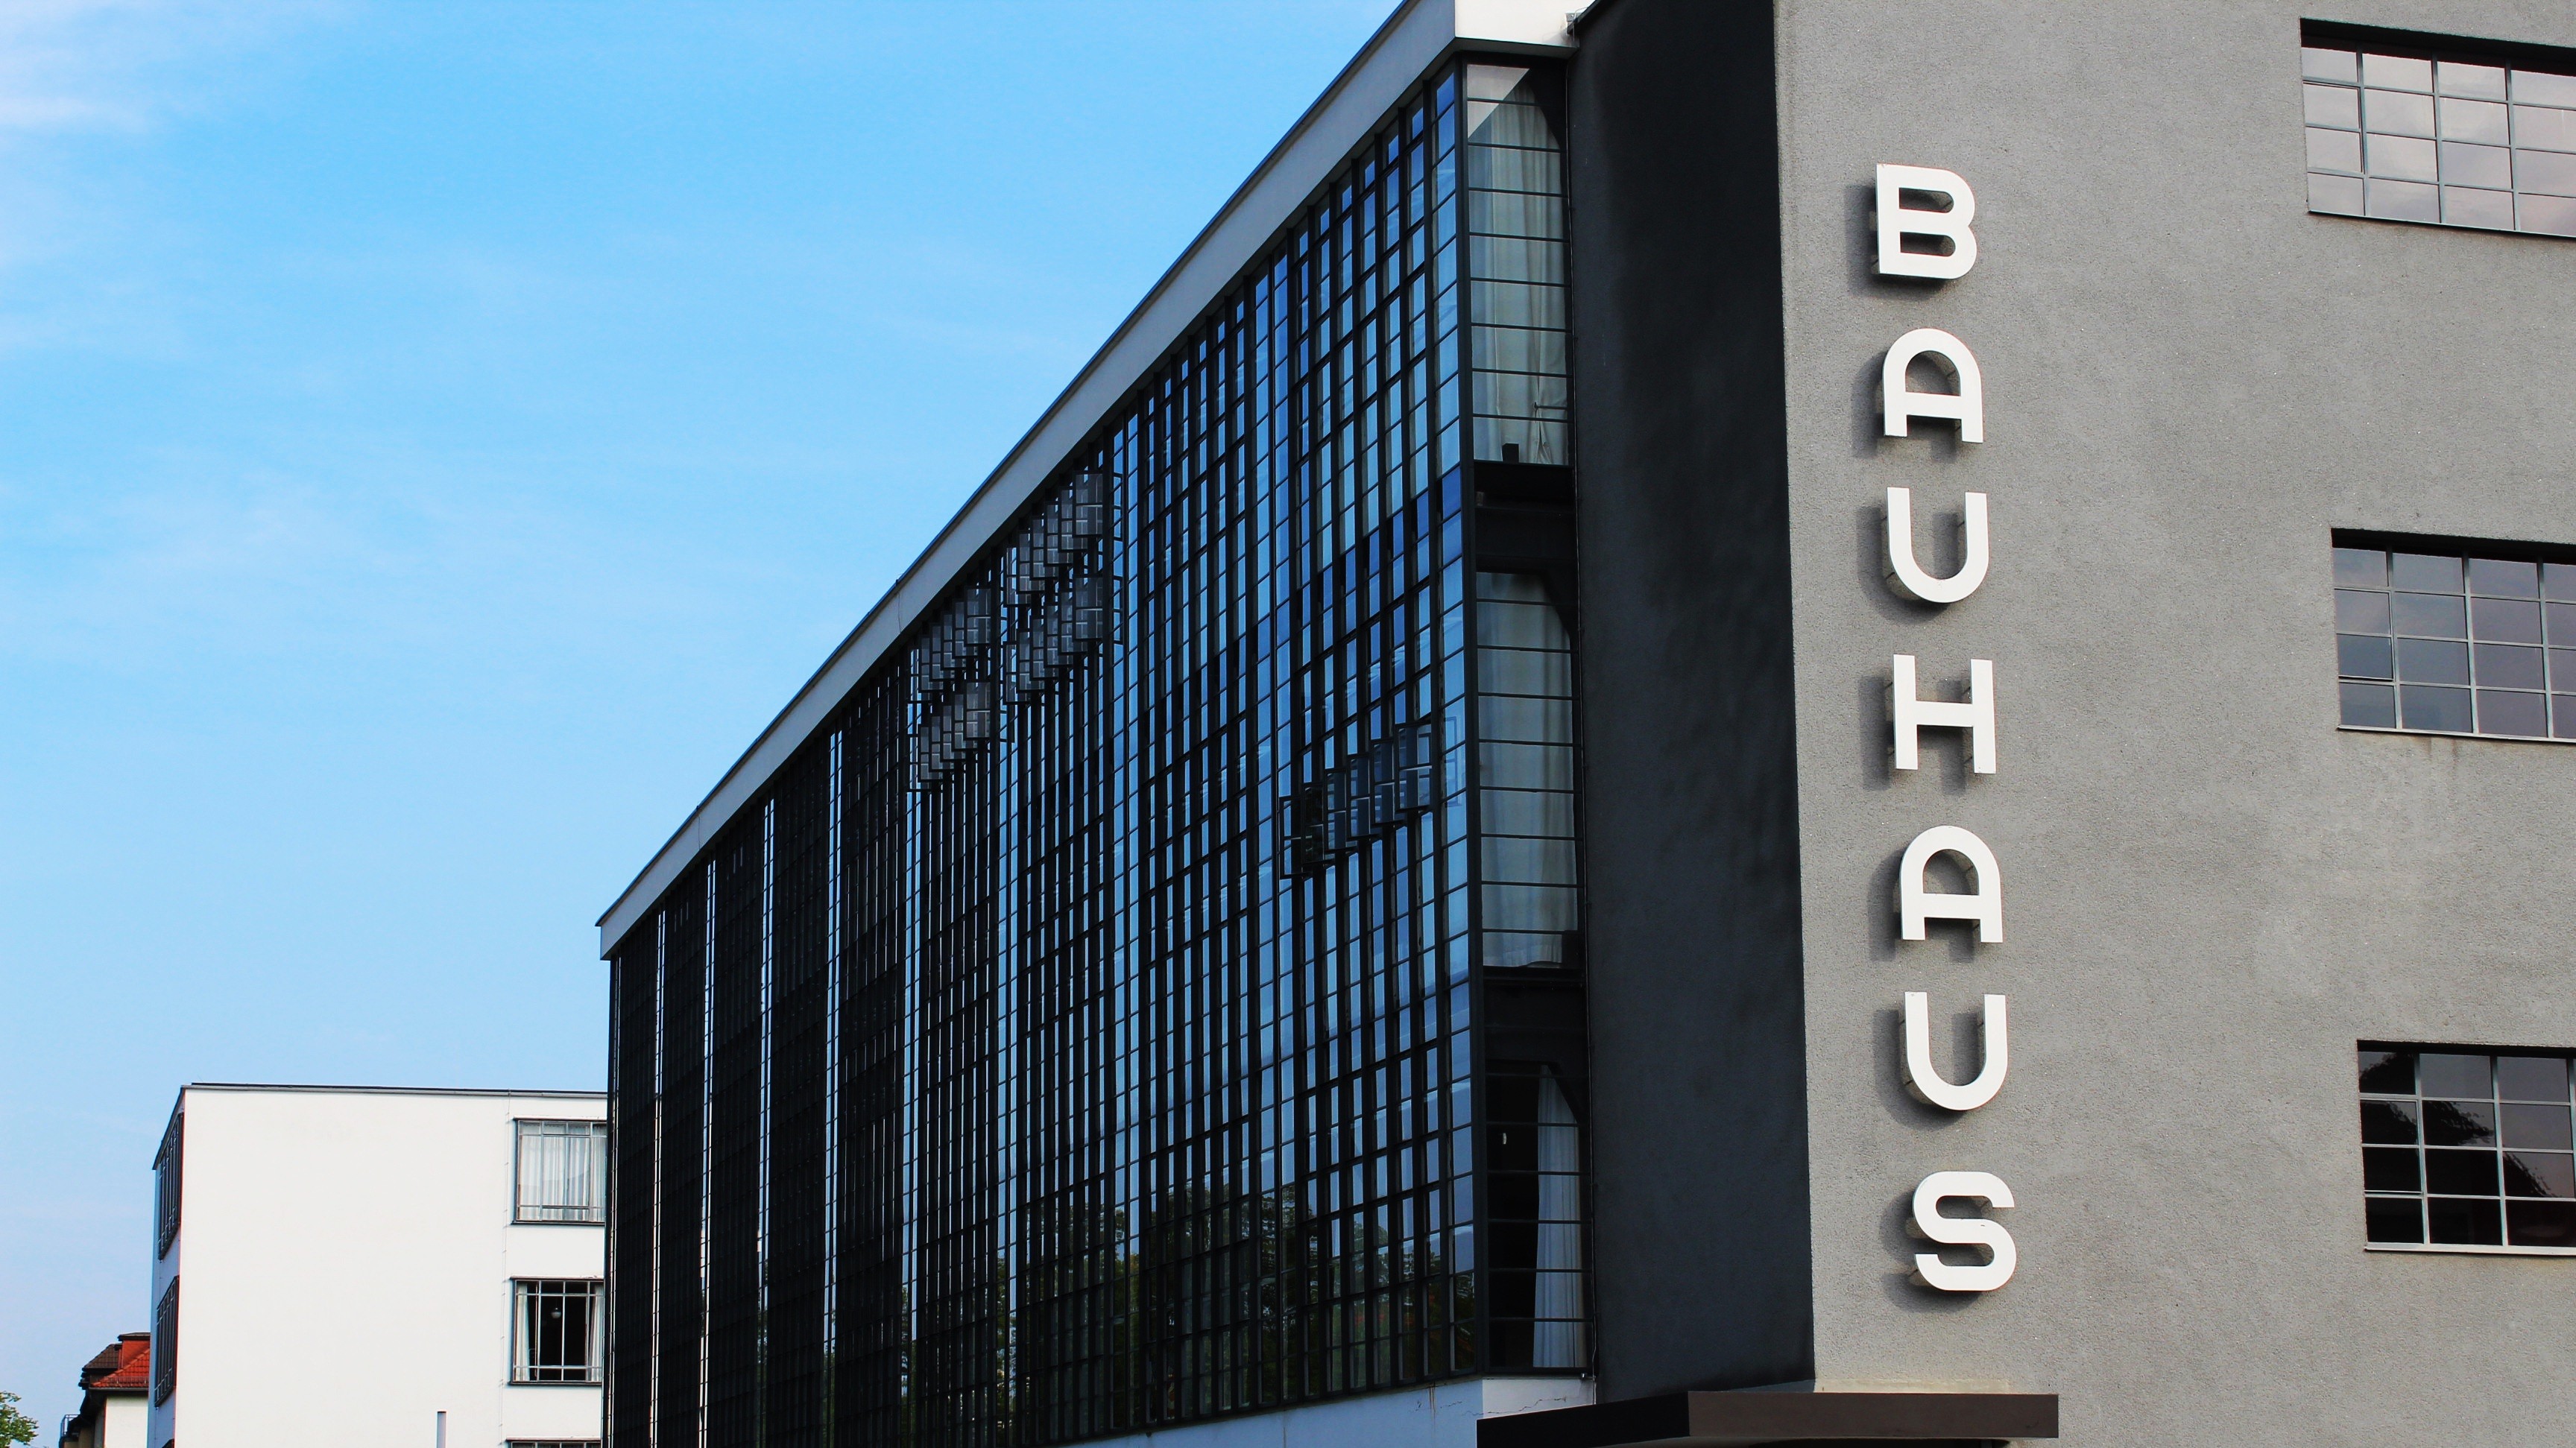 Bauhaus building with the giant letters on its facade